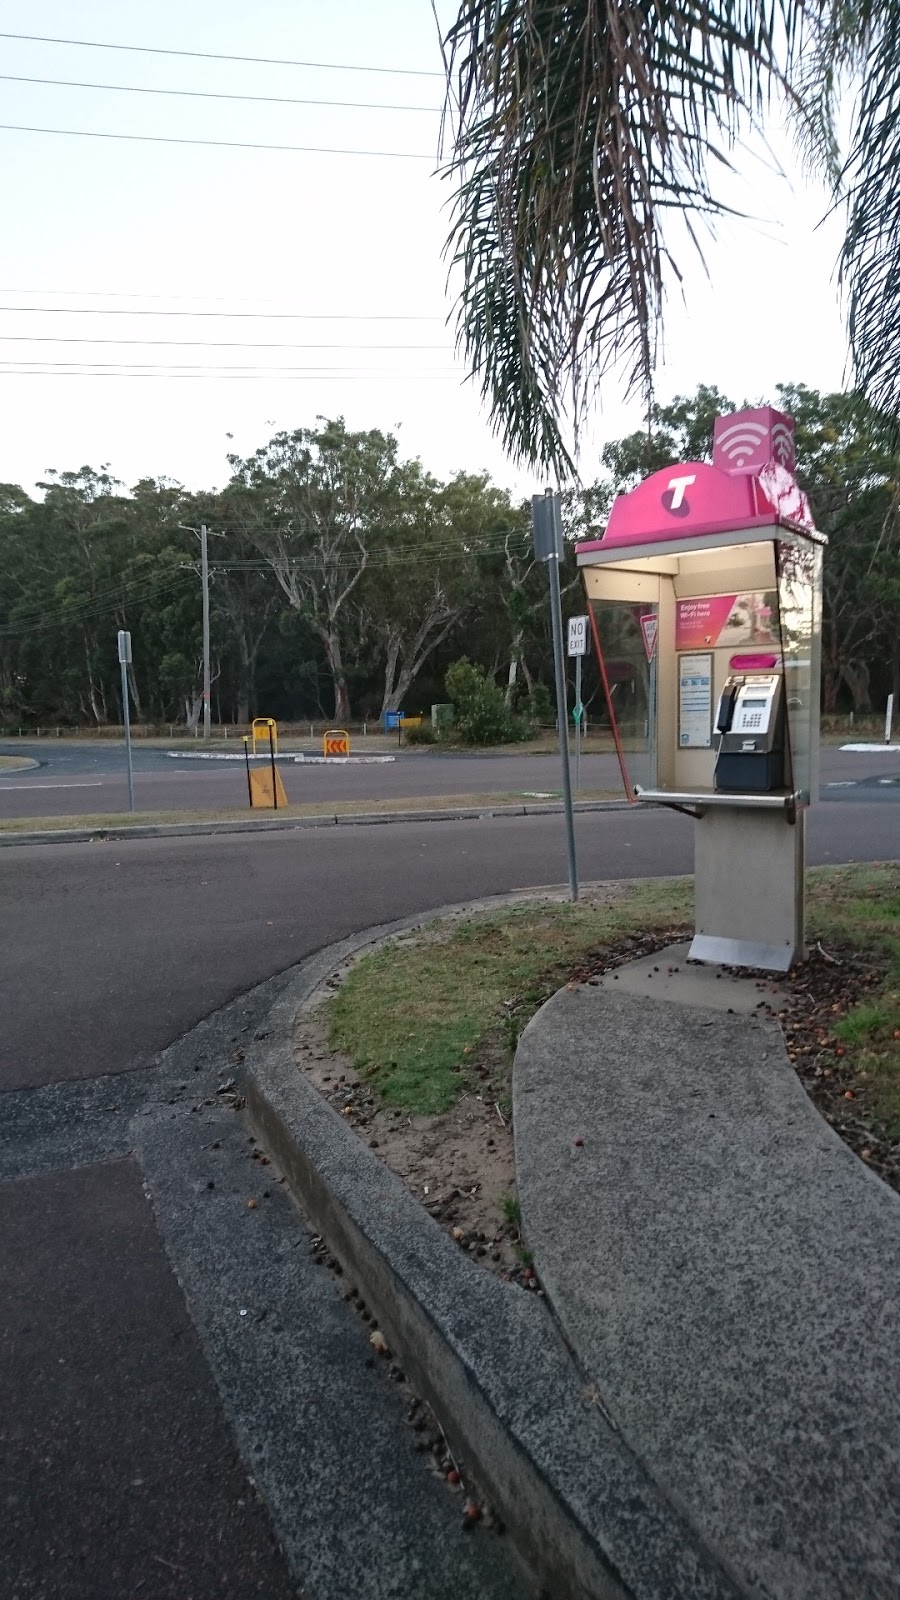 Telstra Phone Booth | shopping mall | Parkside Ave, Bateau Bay NSW 2261, Australia